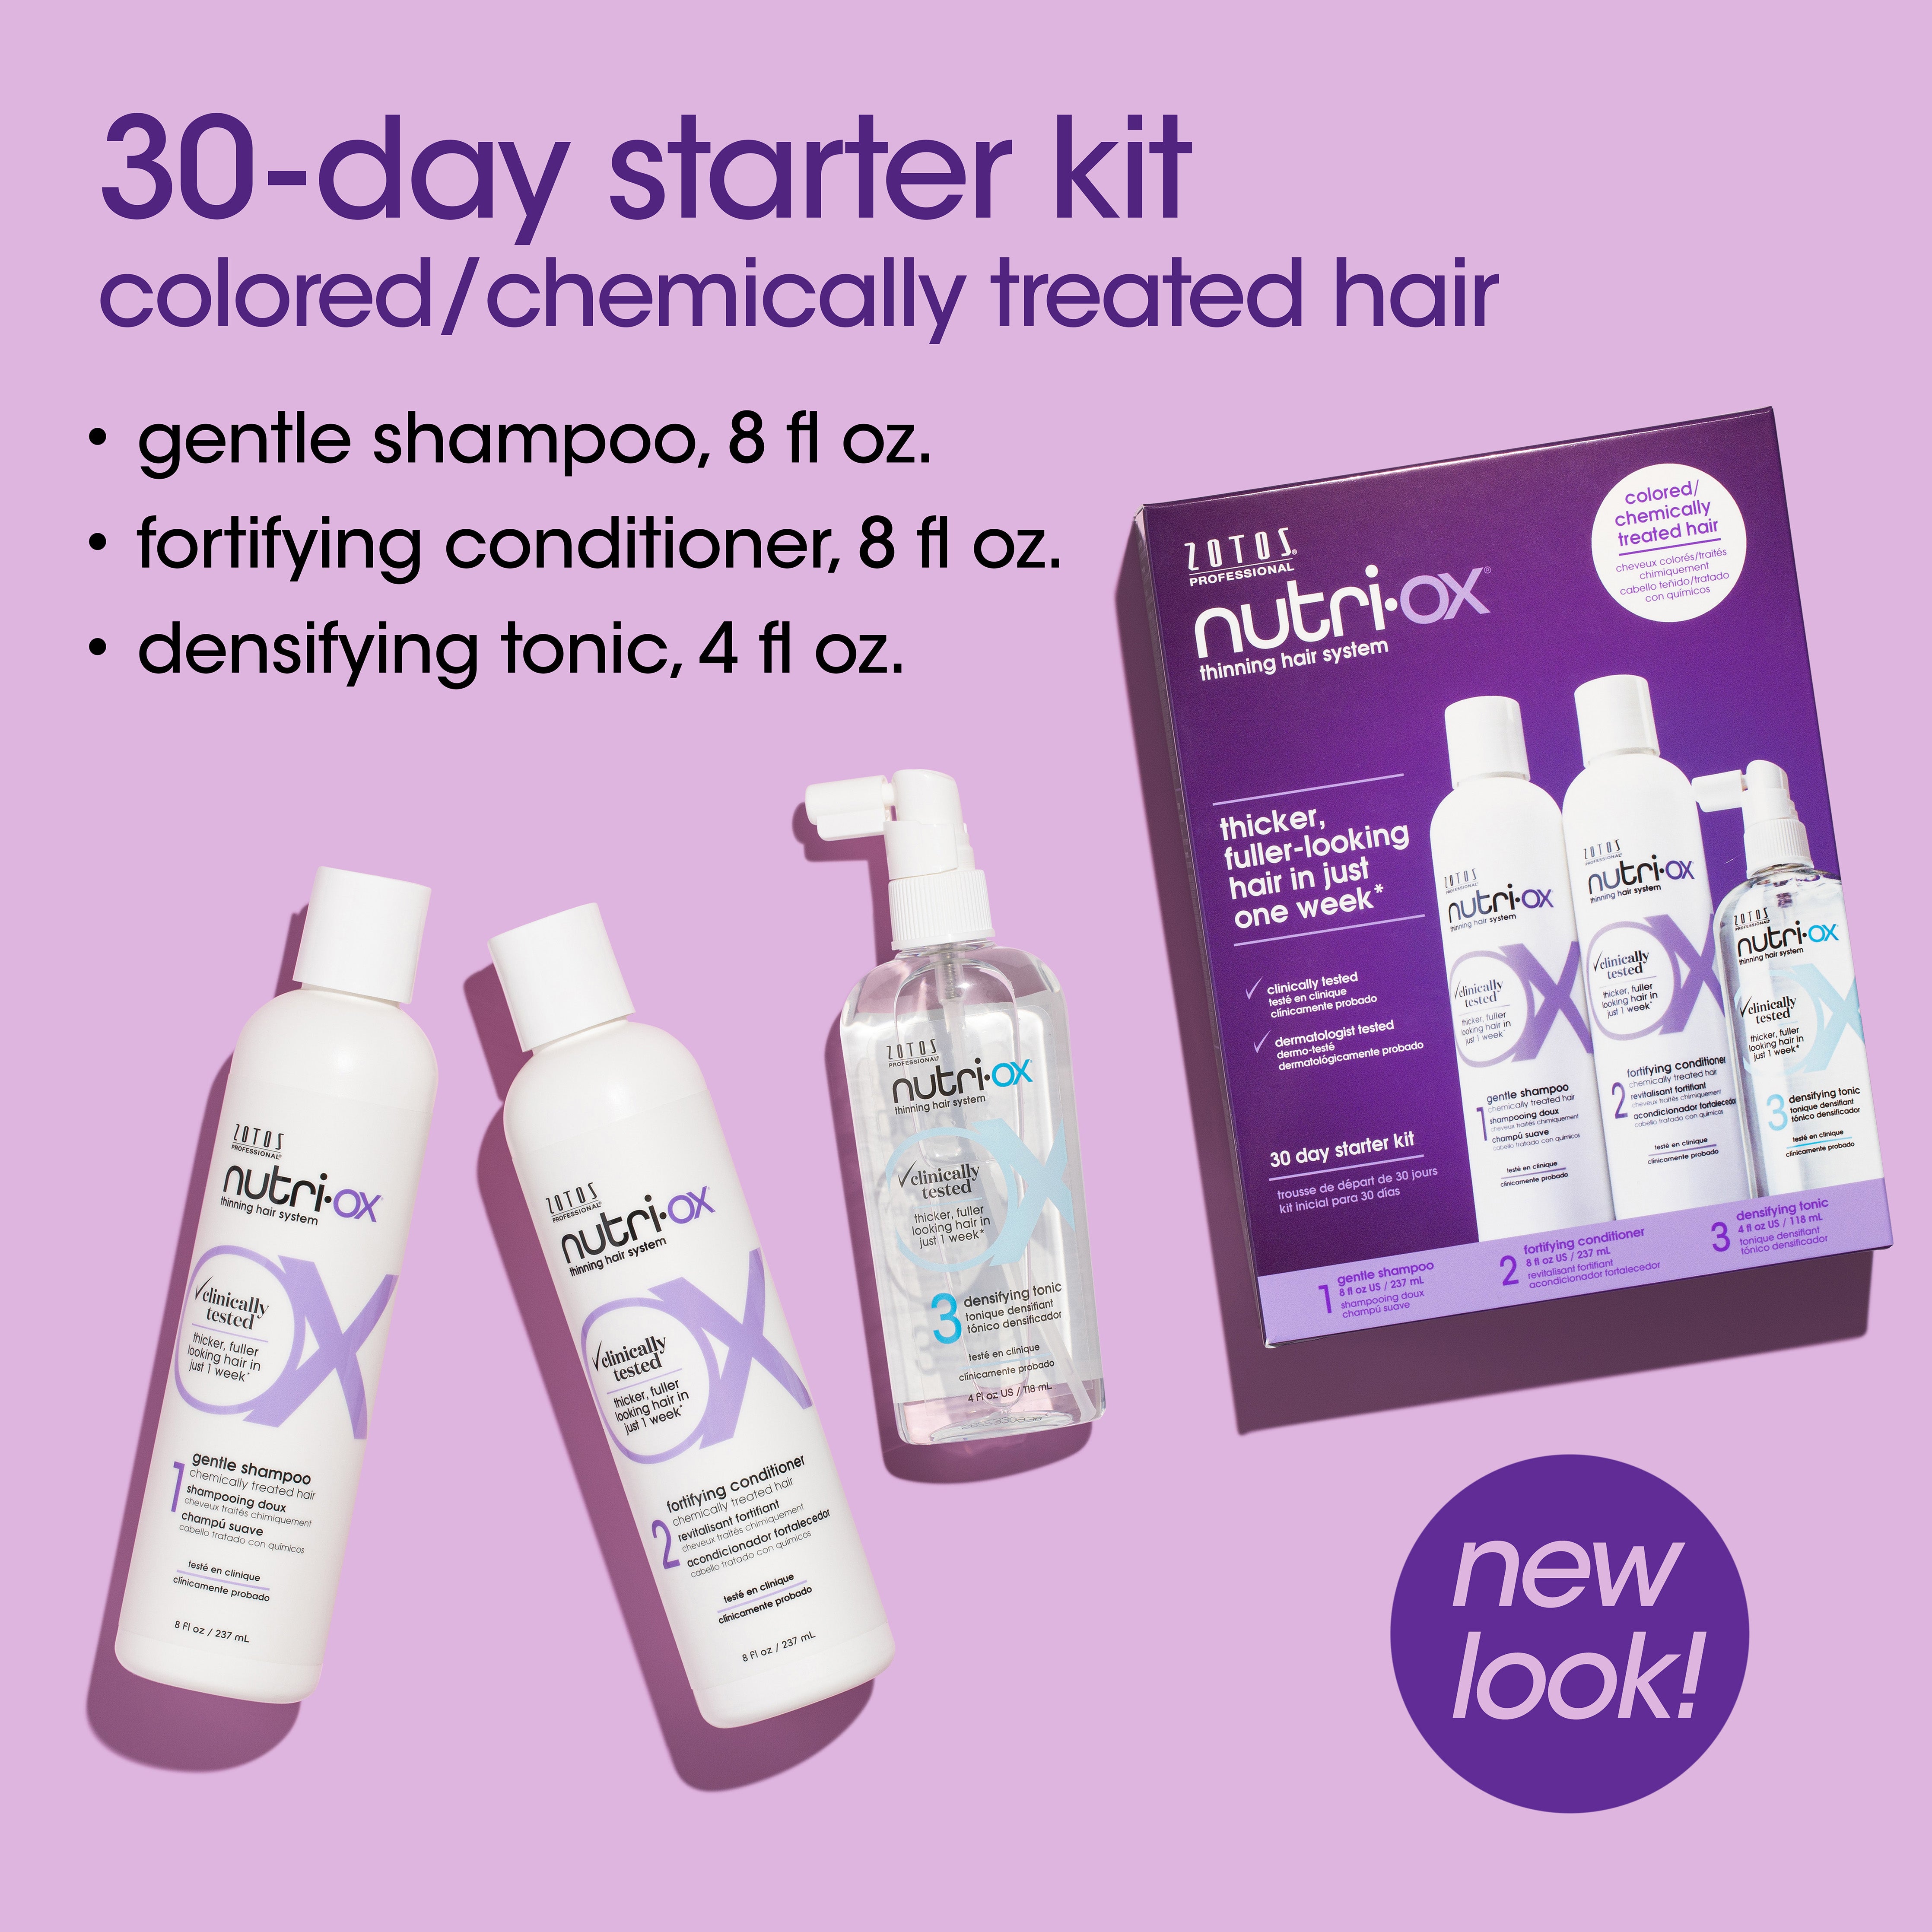 The three bottles included in the 30-day starter kit for colored/chemically treated hair. Includes: gentle shampoo, 8 fl oz, fortifying conditioner, 8 fl oz, and densifying tonic, 4 fl oz.